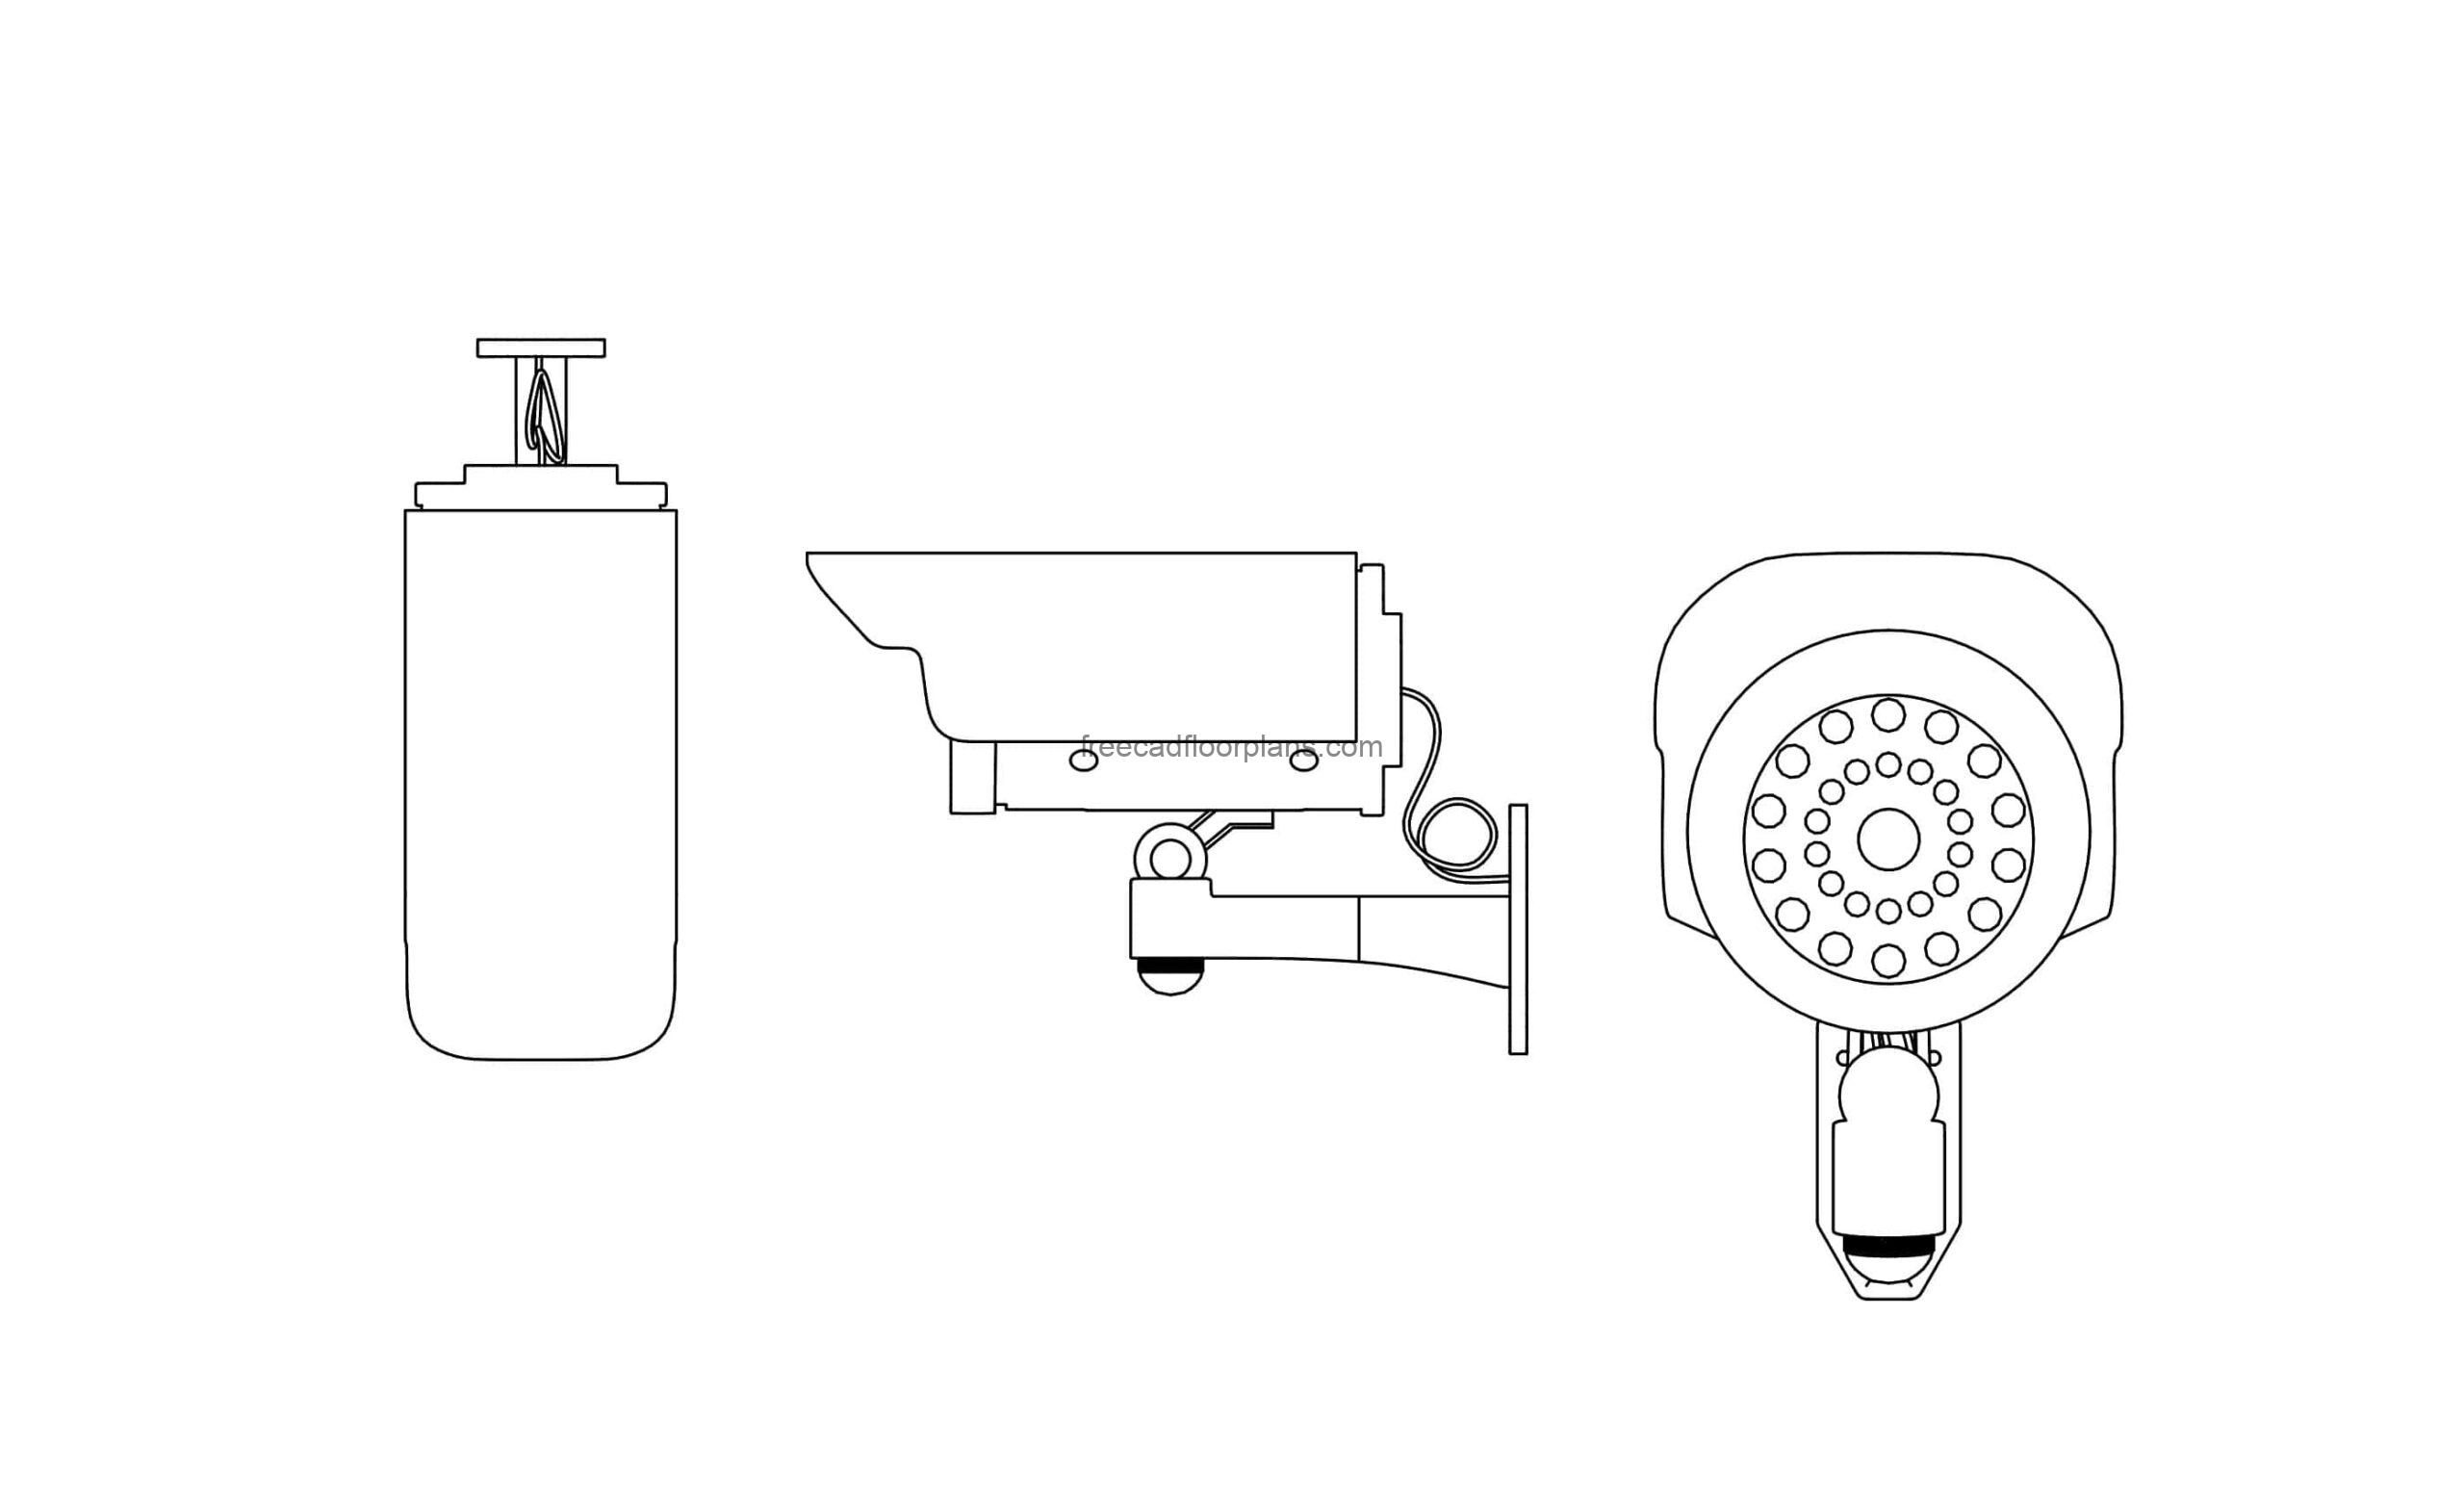 anpr security camera cad block drawing elevations and plan views dwg file for free download